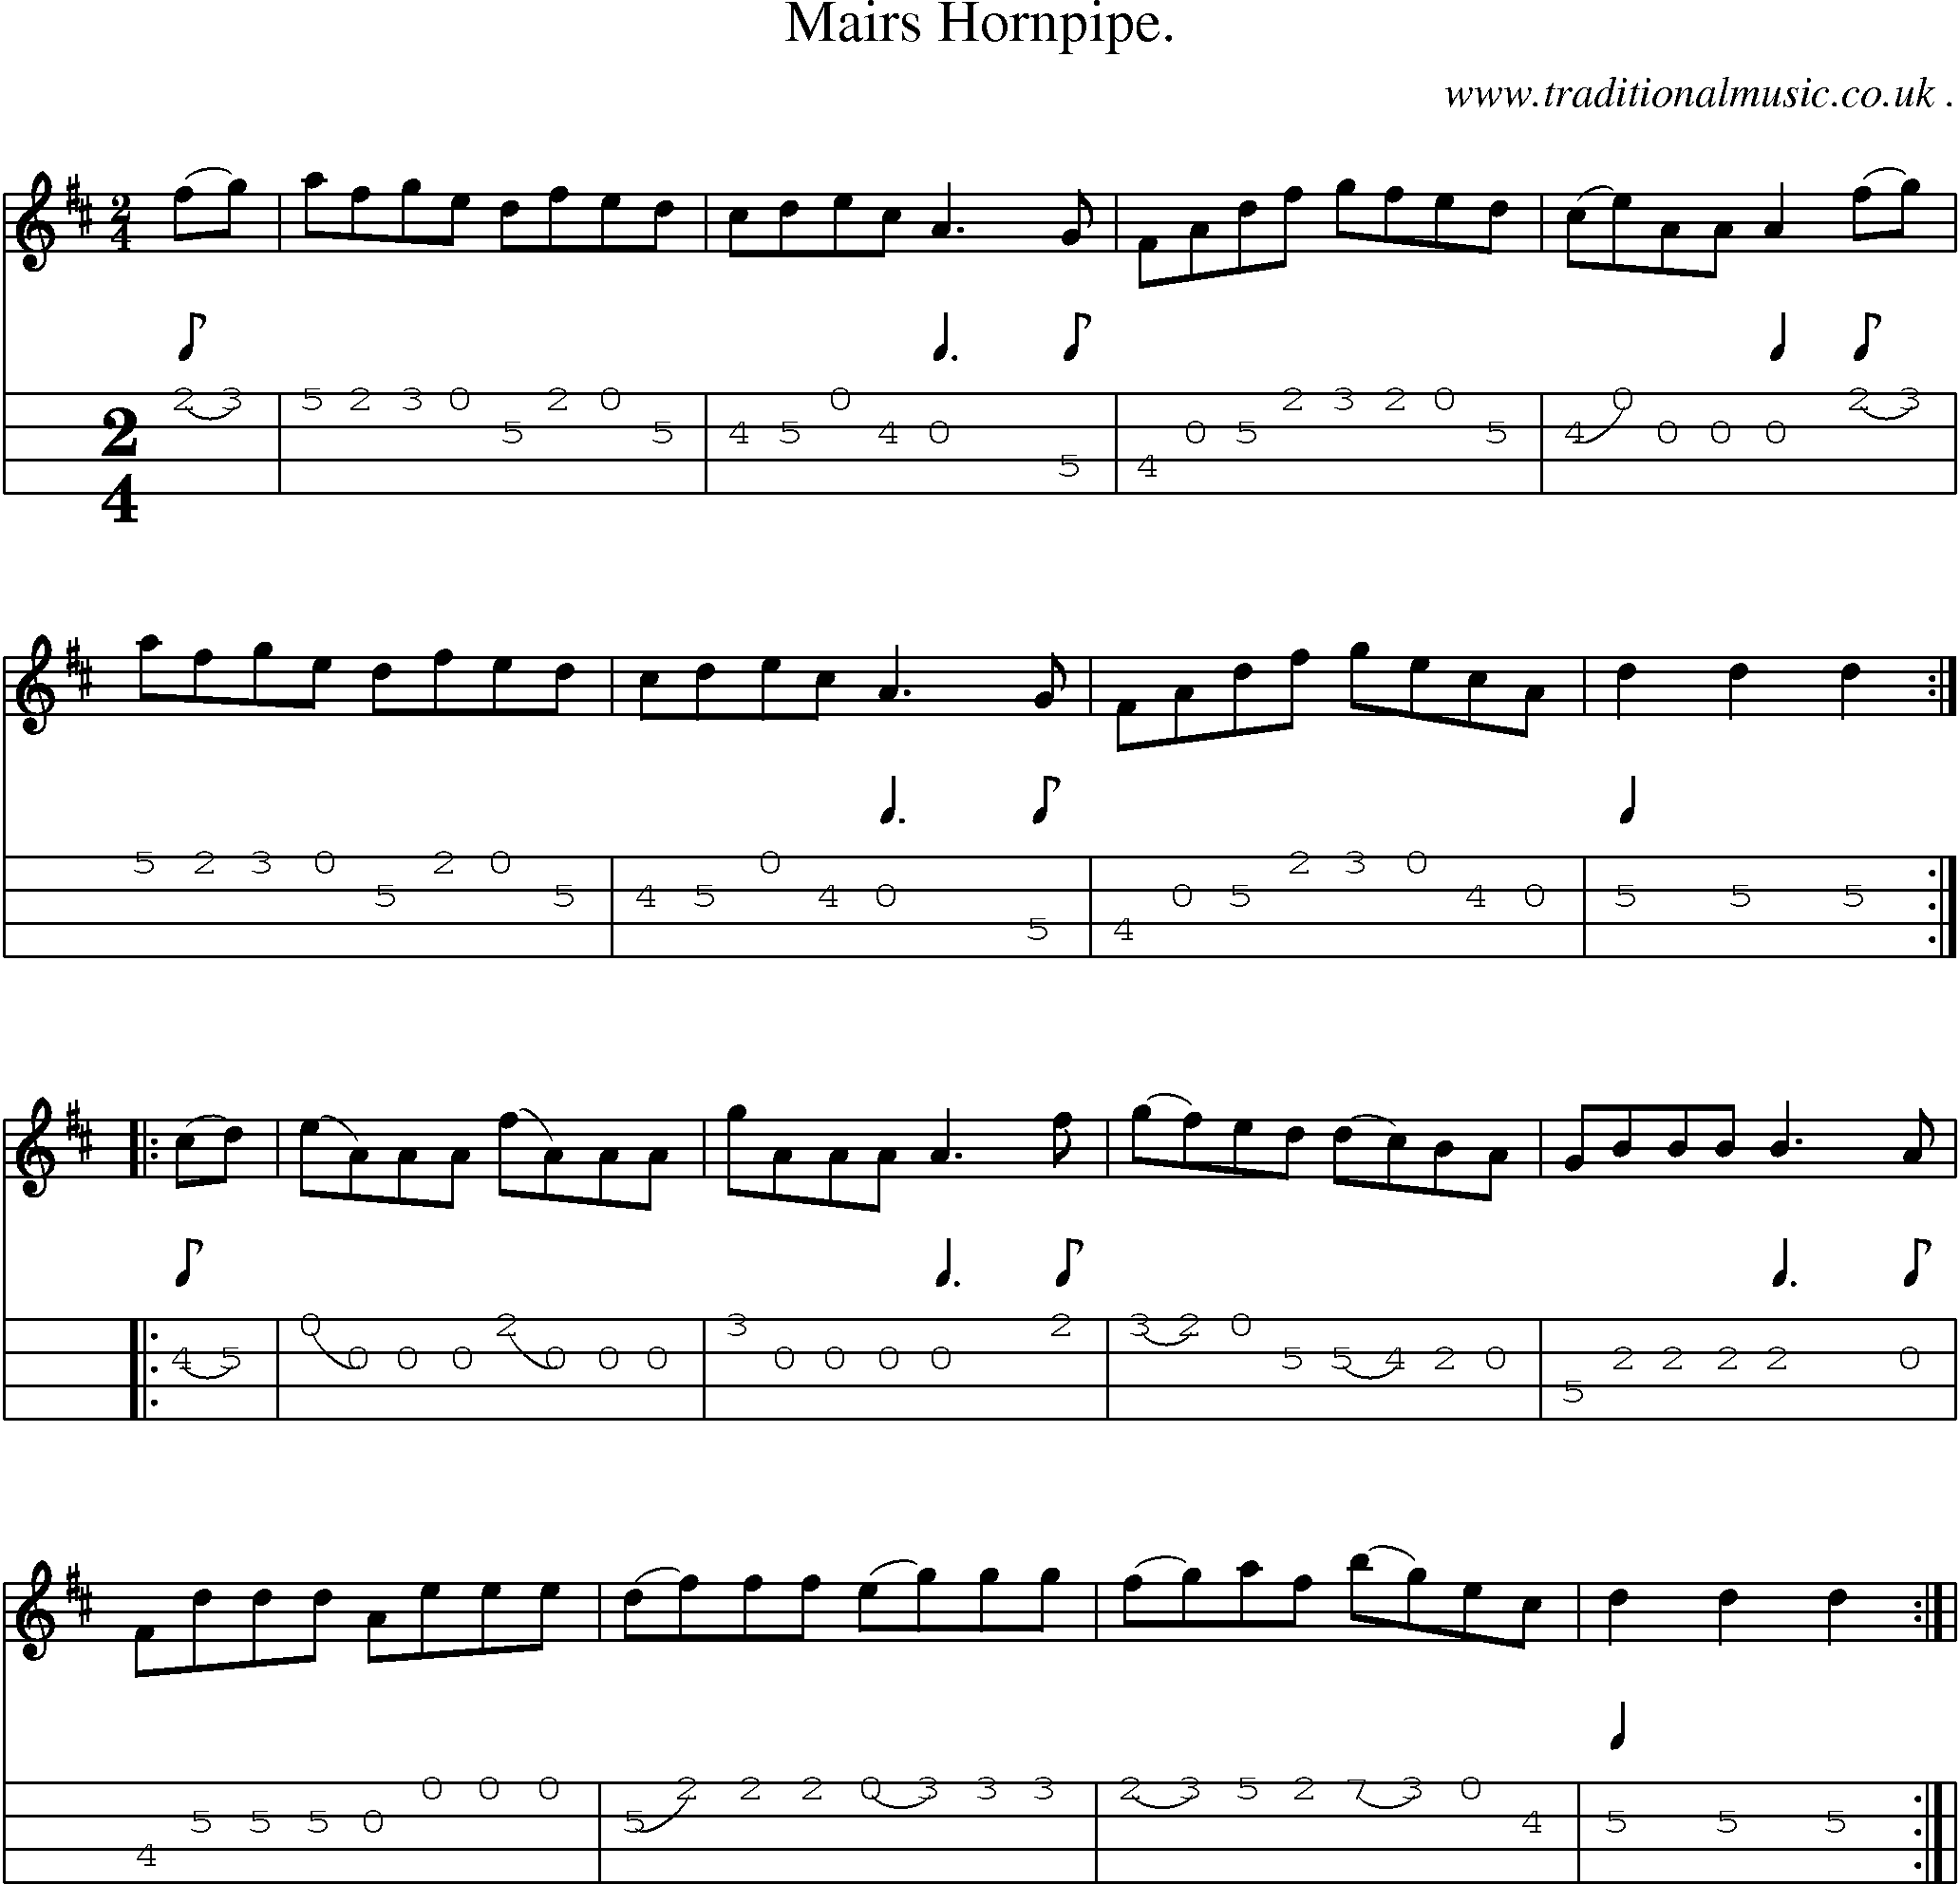 Sheet-Music and Mandolin Tabs for Mairs Hornpipe